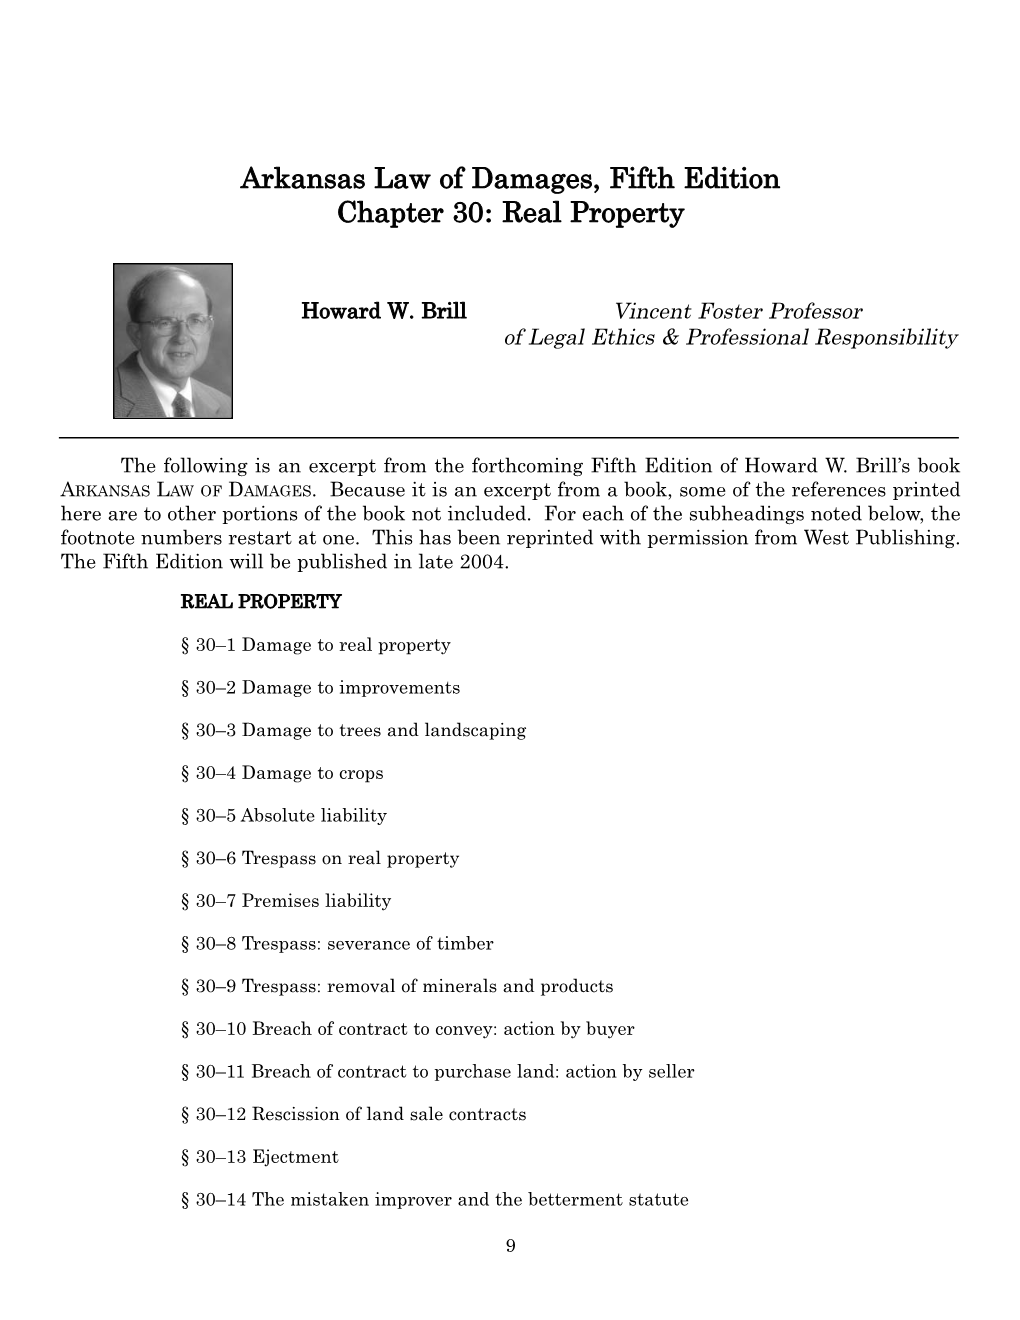 Arkansas Law of Damages, Fifth Edition Chapter 30: Real Property